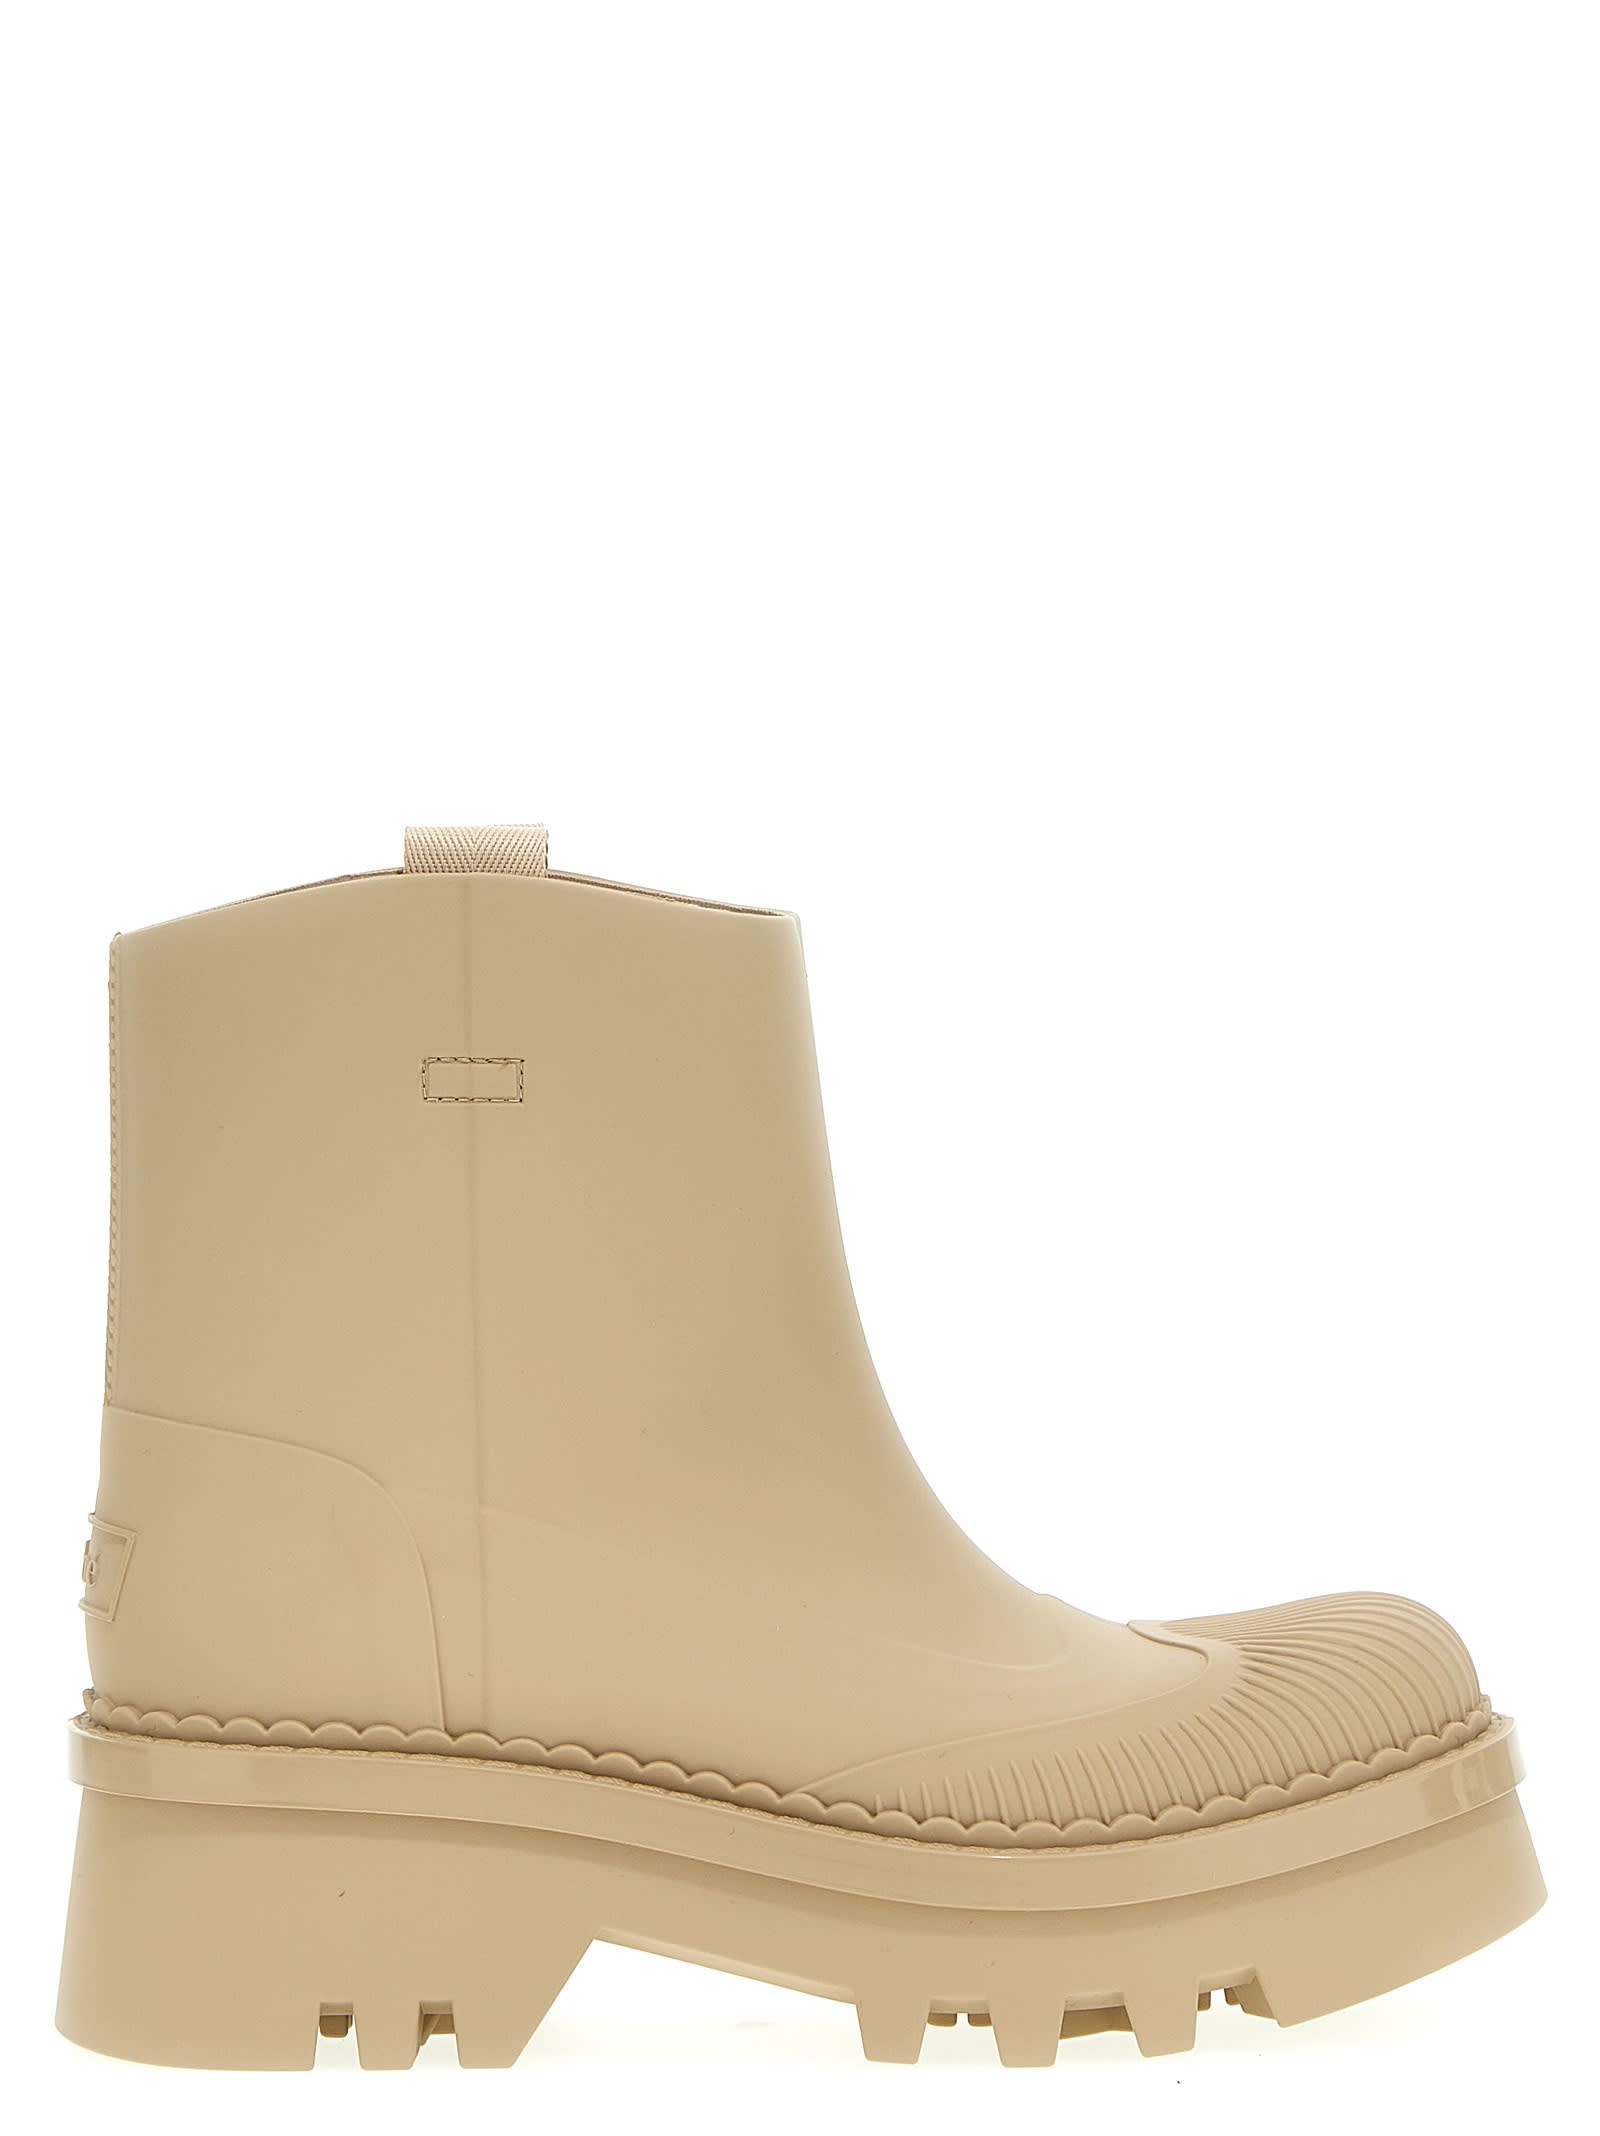 Shop Chloé Raina Ankle Boots In Beige